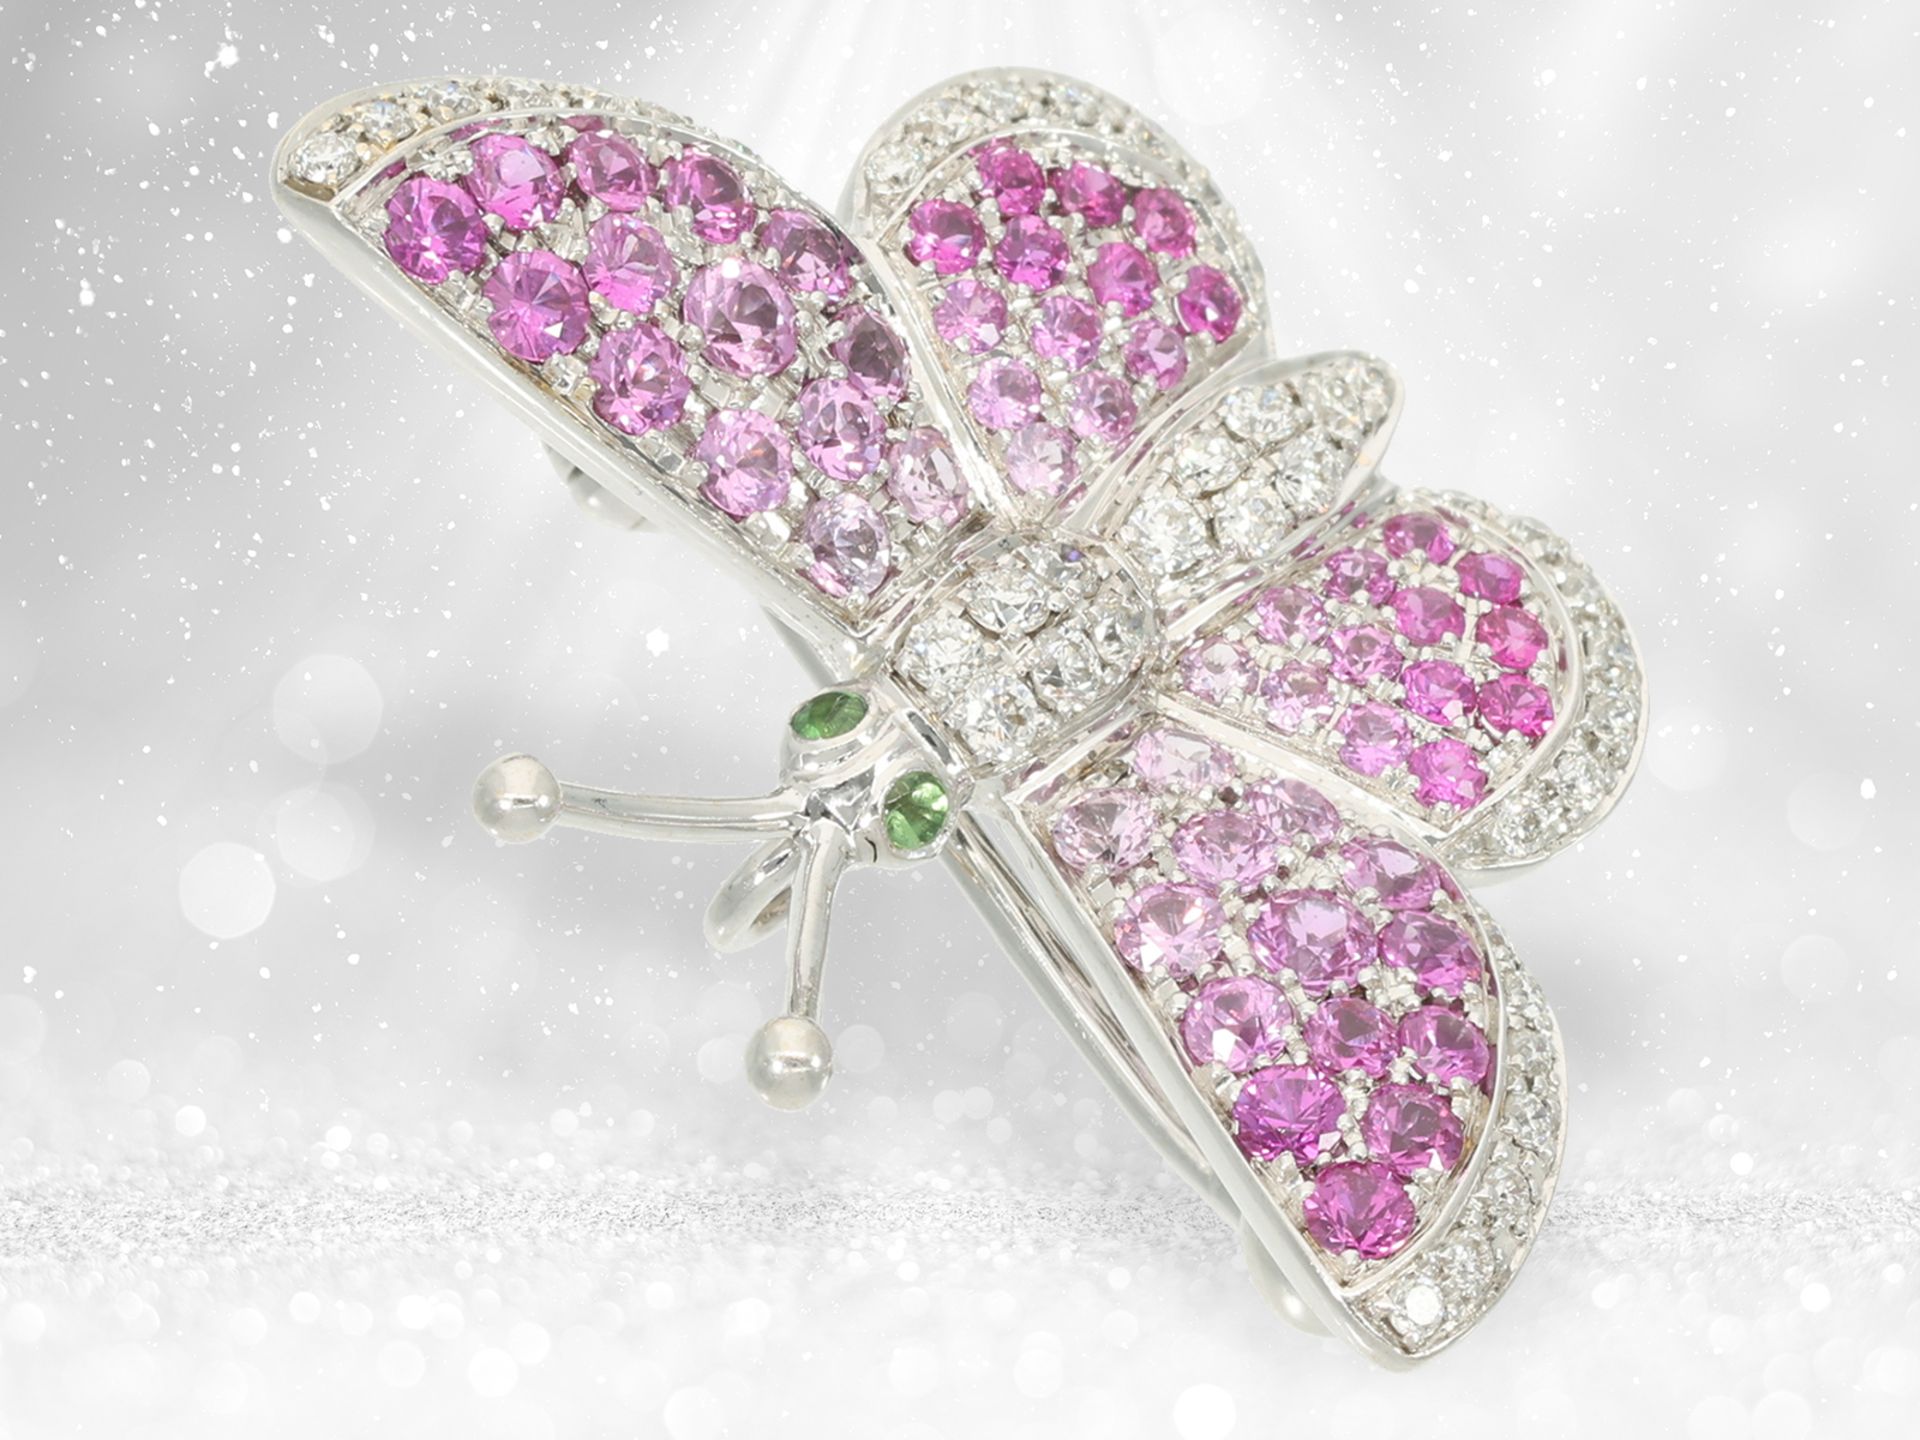 Pendant/brooch: highly refined goldsmith's pendant by Wempe "Butterfly", pink sapphires and diamonds - Image 4 of 5